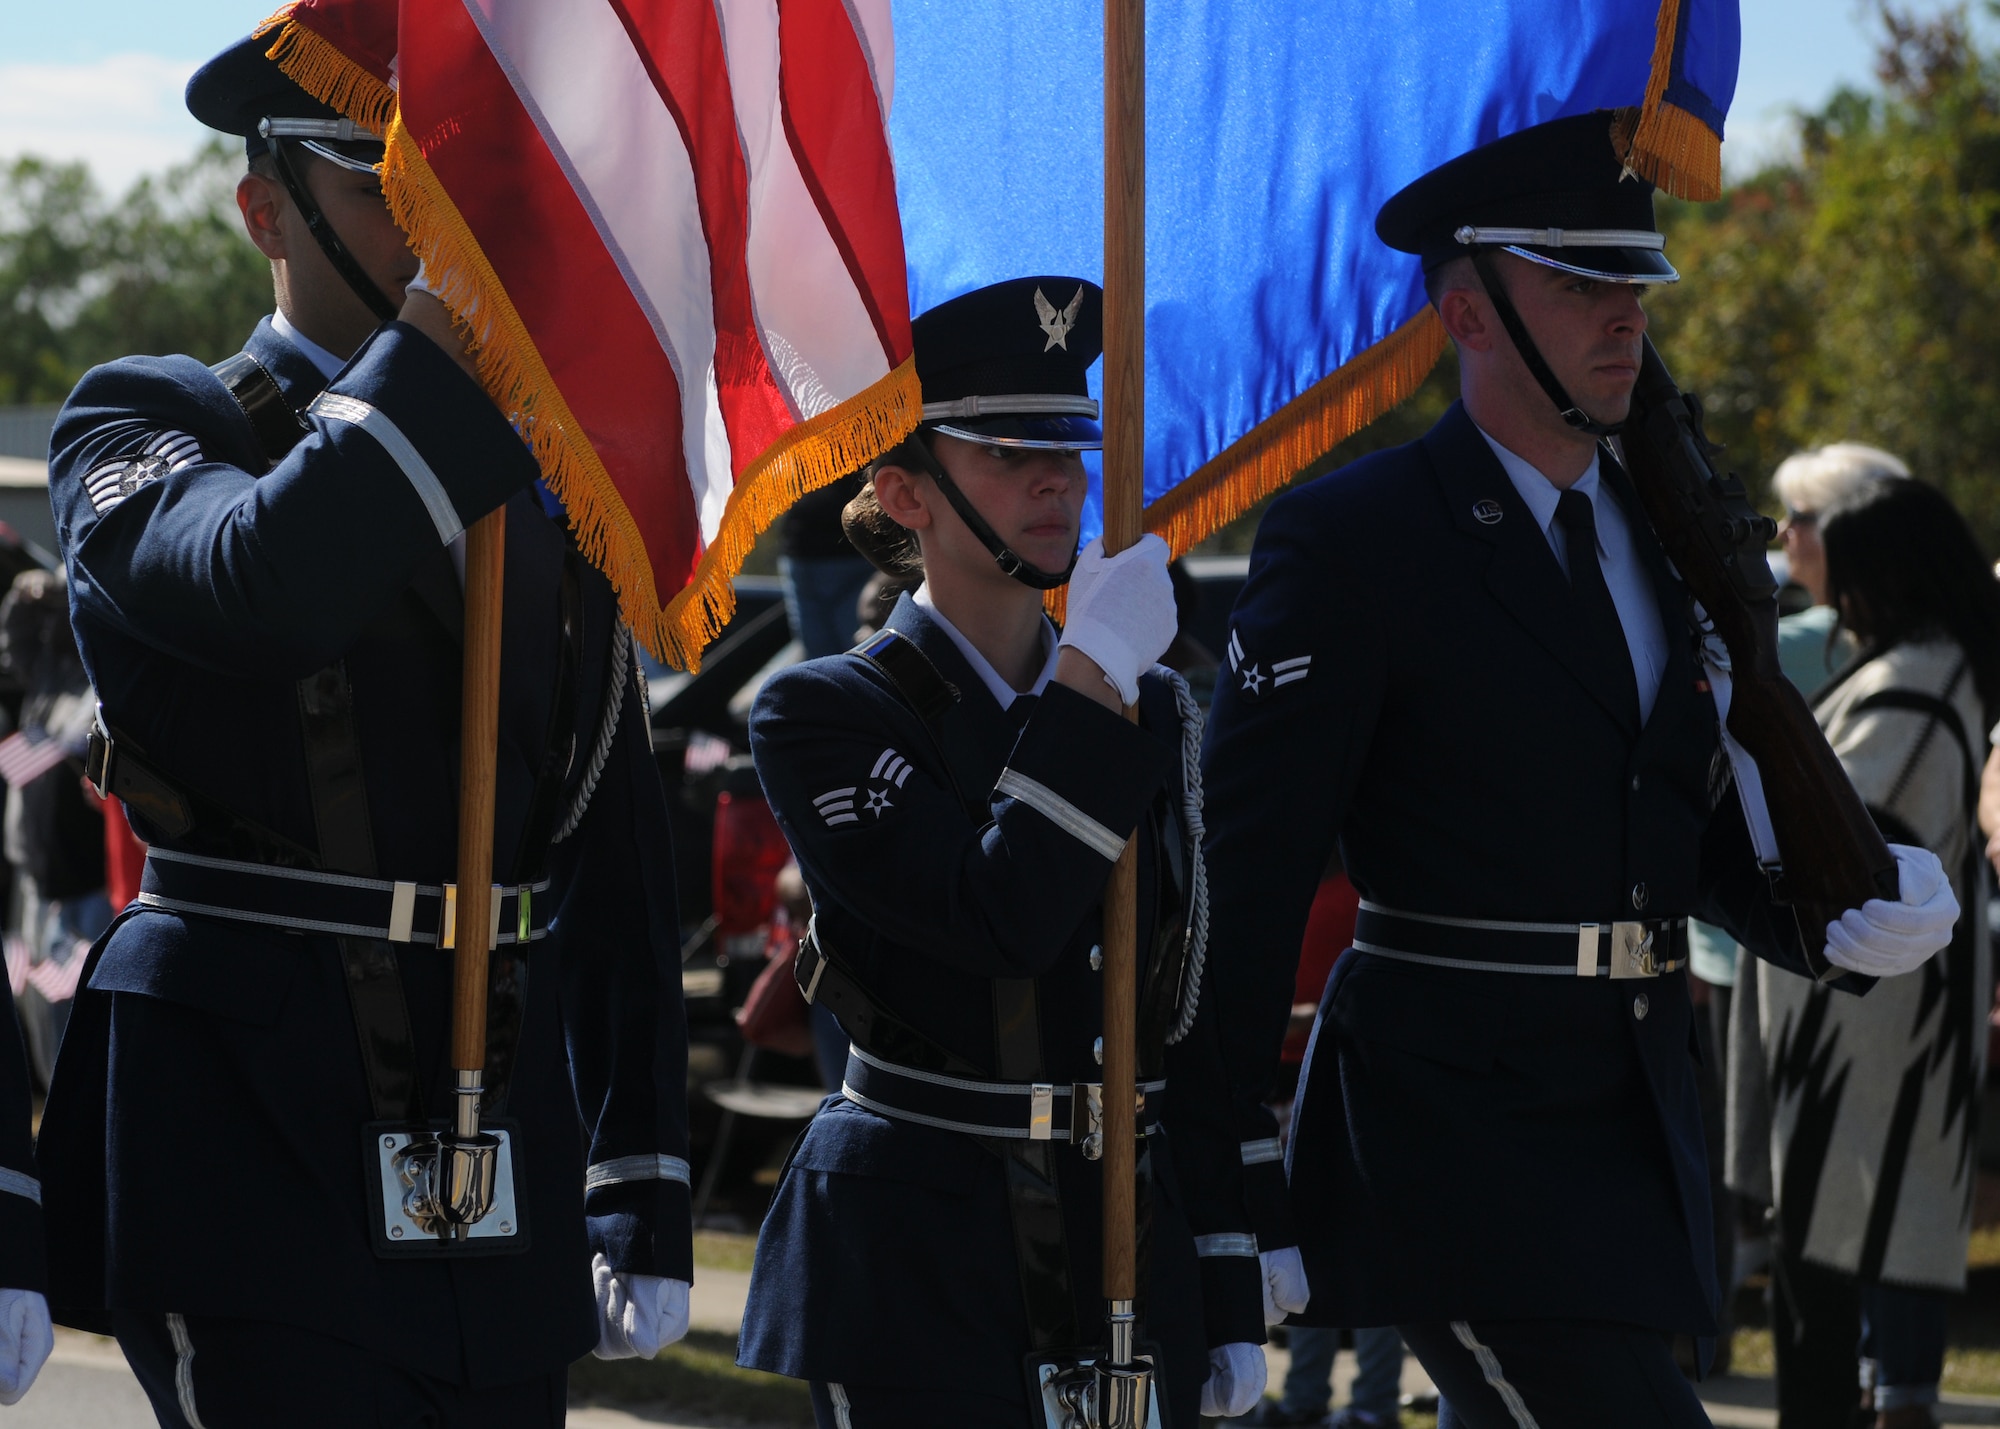 Keesler Honor Guard Airmen march in the 16th Annual Gulf Coast Veterans Day Parade Nov. 12, 2016, in D’Iberville, Miss. More than 5,000 Mississippi and Louisiana citizens watched the parade honoring Gulf Coast veterans. Keesler Honor Guard members, base leadership and more than 215 81st Training Group Airmen with the 50 State Flag Team and Drum and Bugle Corps also came out to celebrate the holiday. (U.S. Air Force photo by Senior Airman Holly Mansfield)